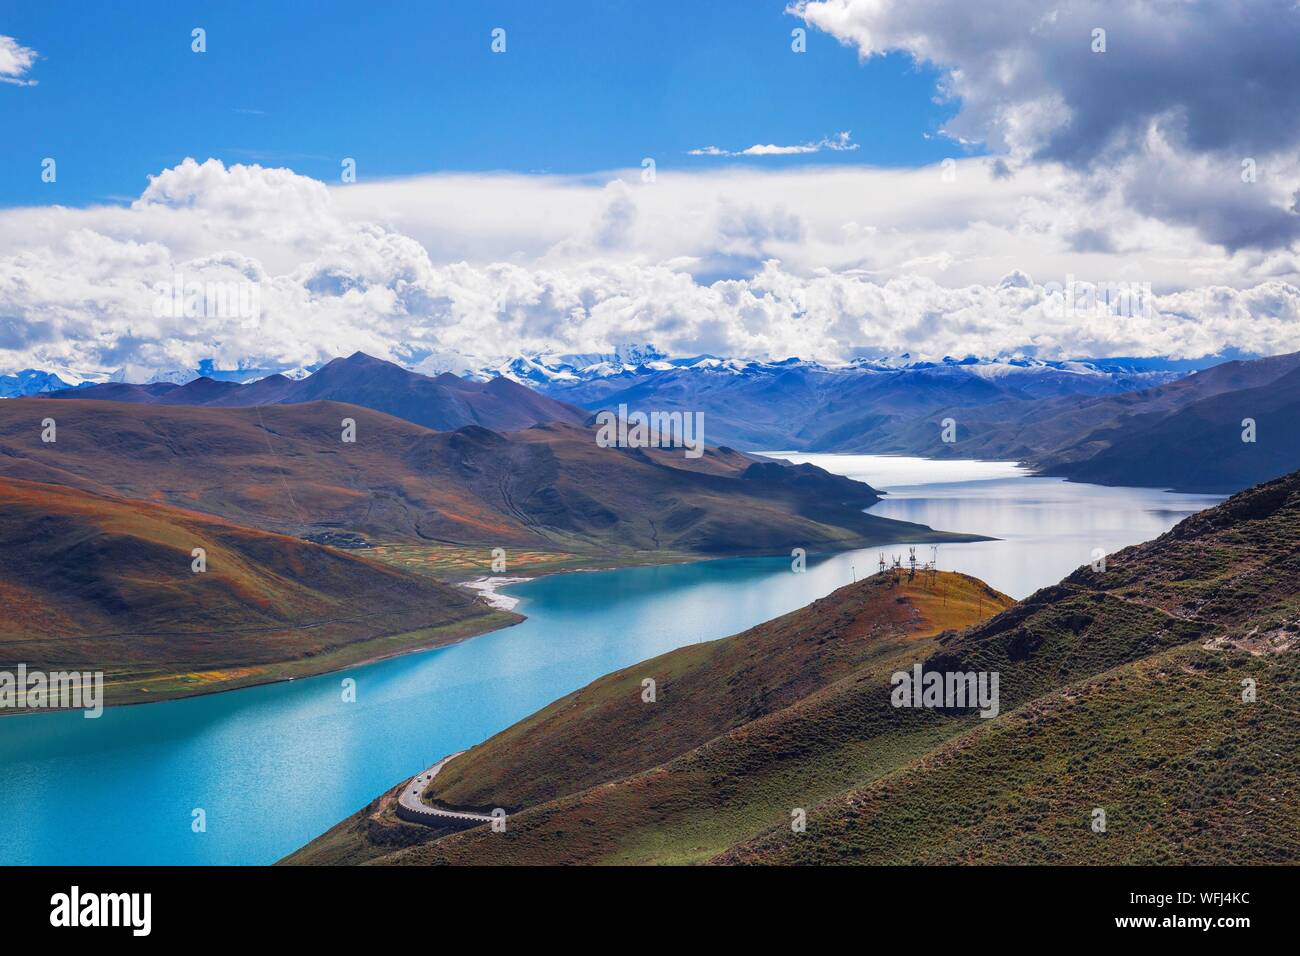 Scenic View Of Turquoise River Amidst Mountains Against Cloudy Sky Stock Photo